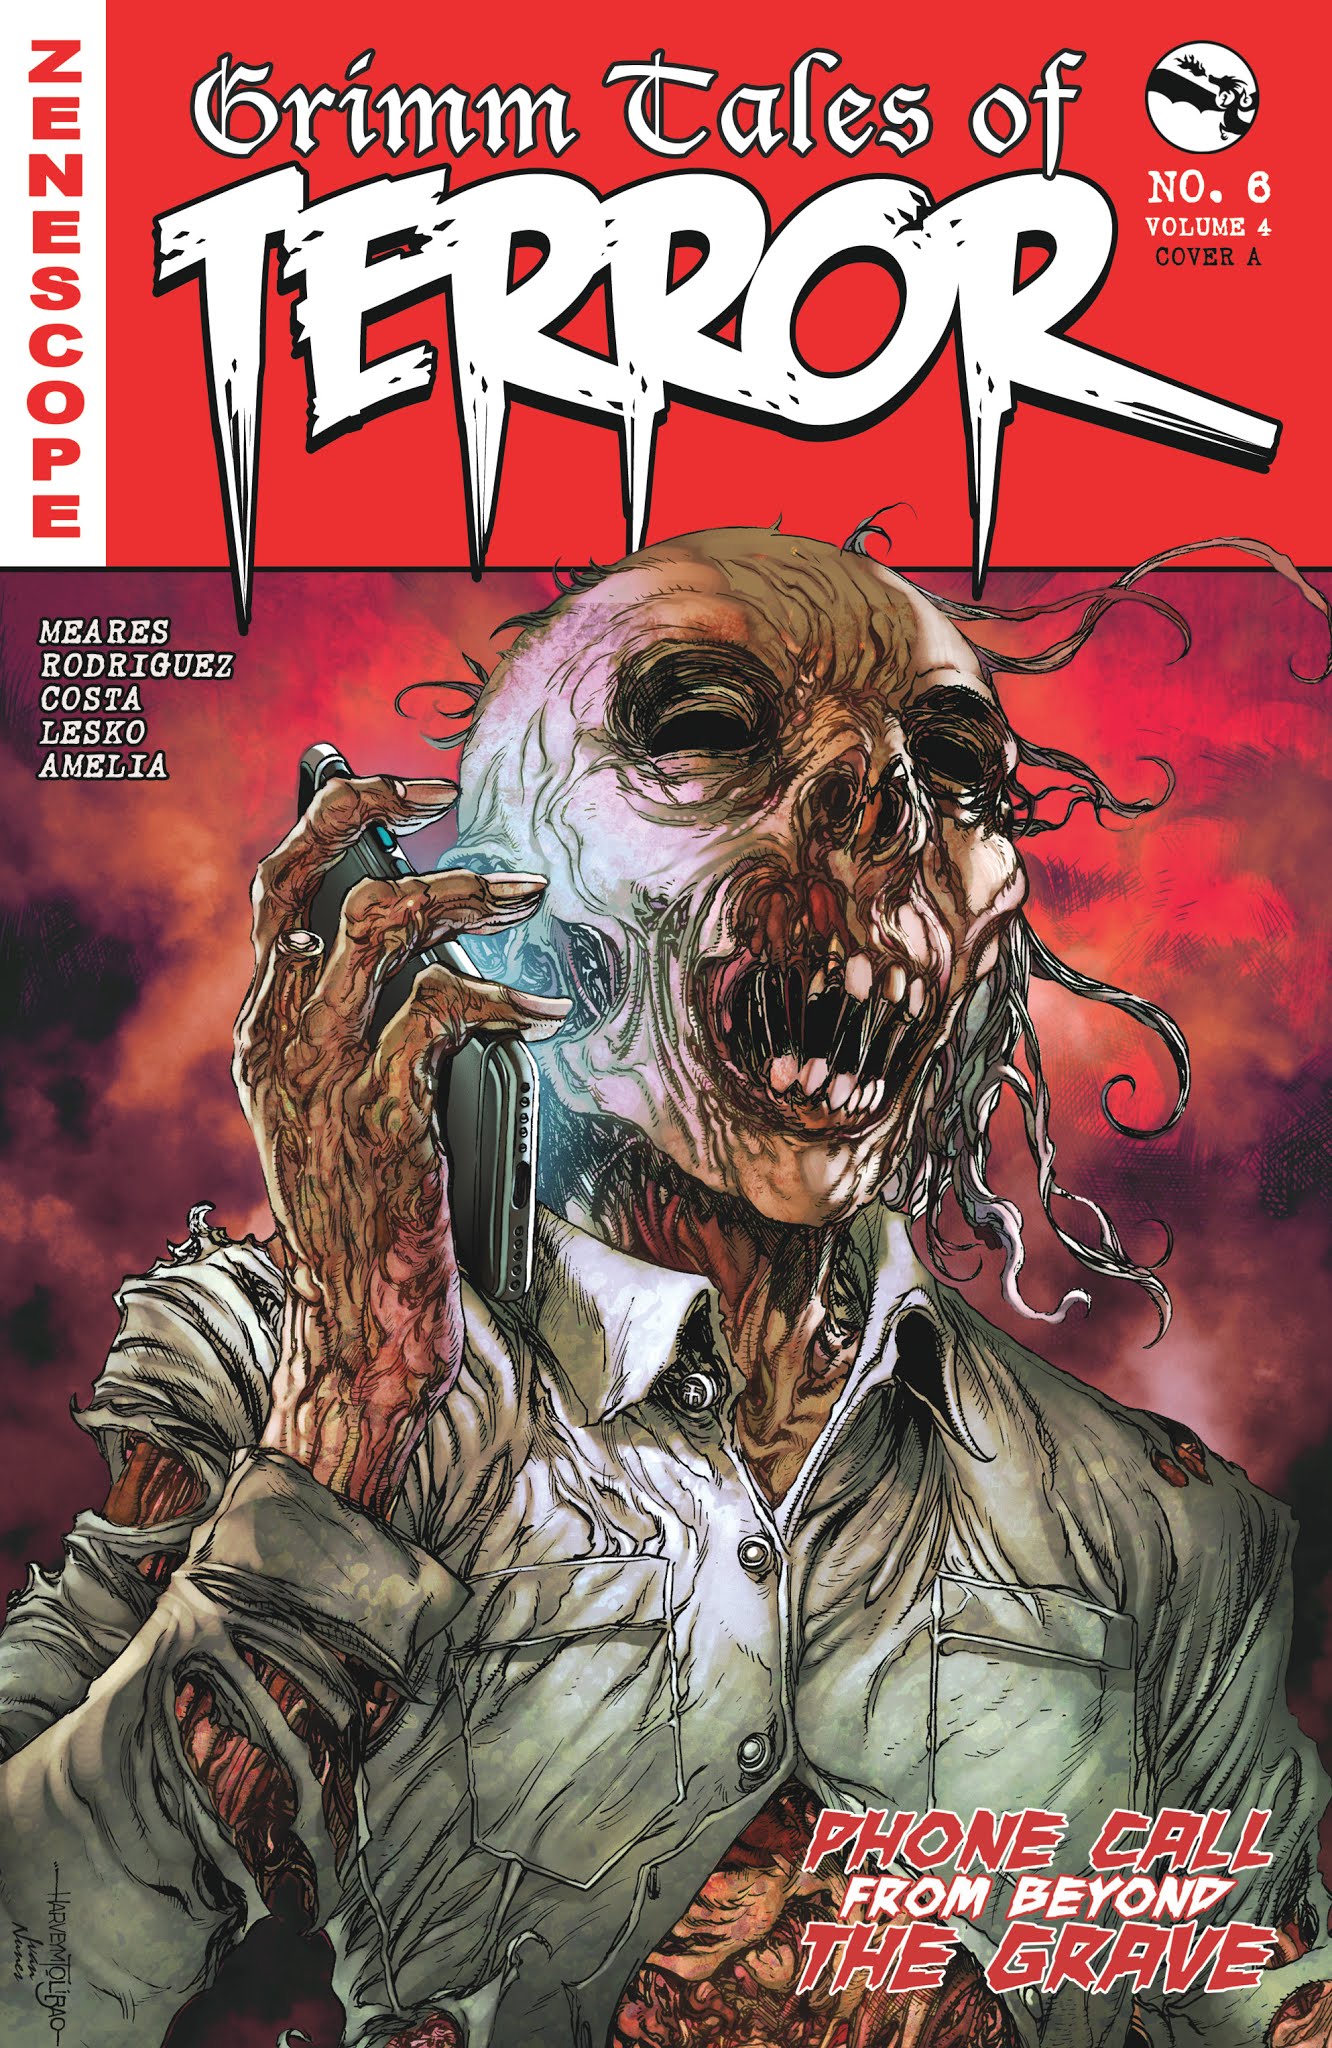 Read online Grimm Tales of Terror (2018) comic -  Issue #6 - 1